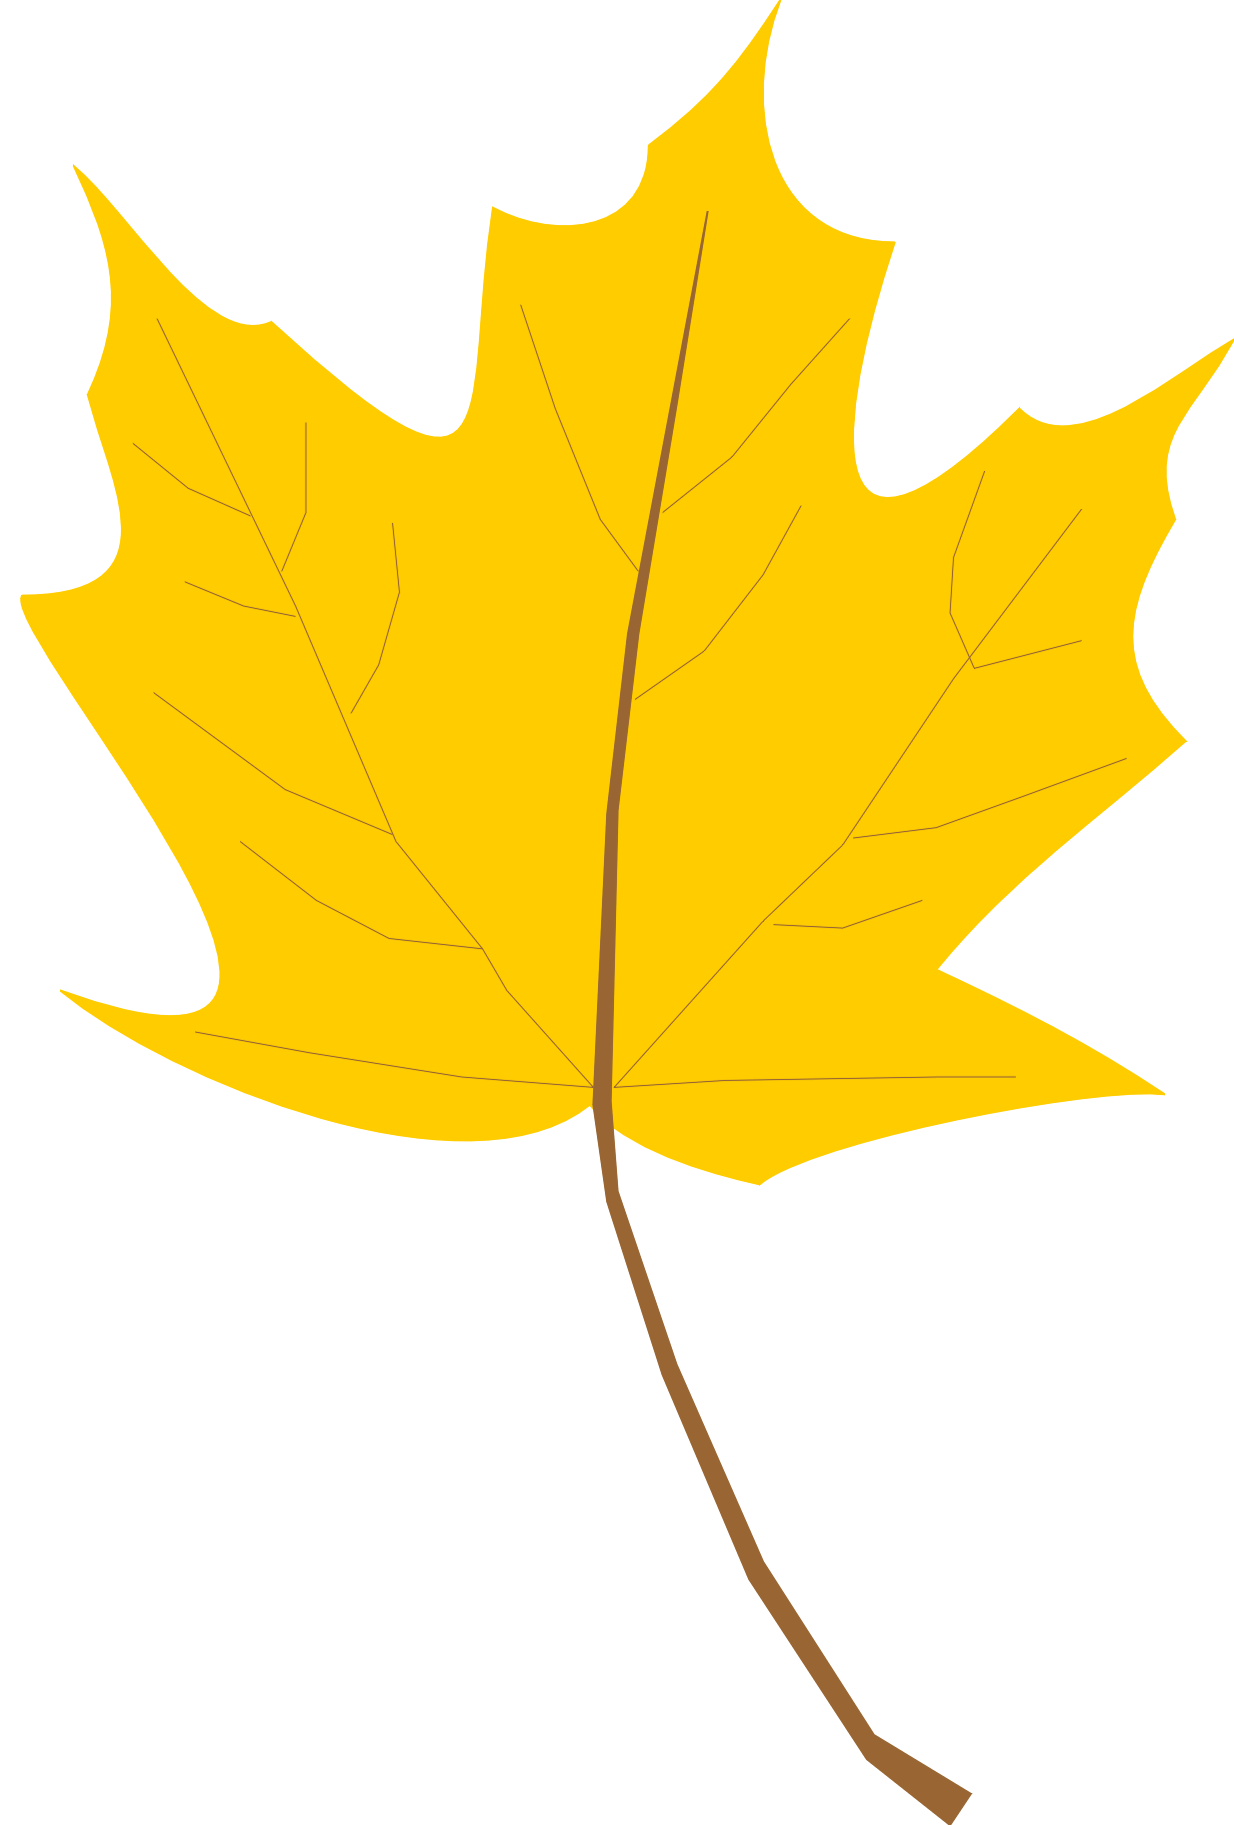 Yellow Leaves Clip Art   Clipart Panda   Free Clipart Images